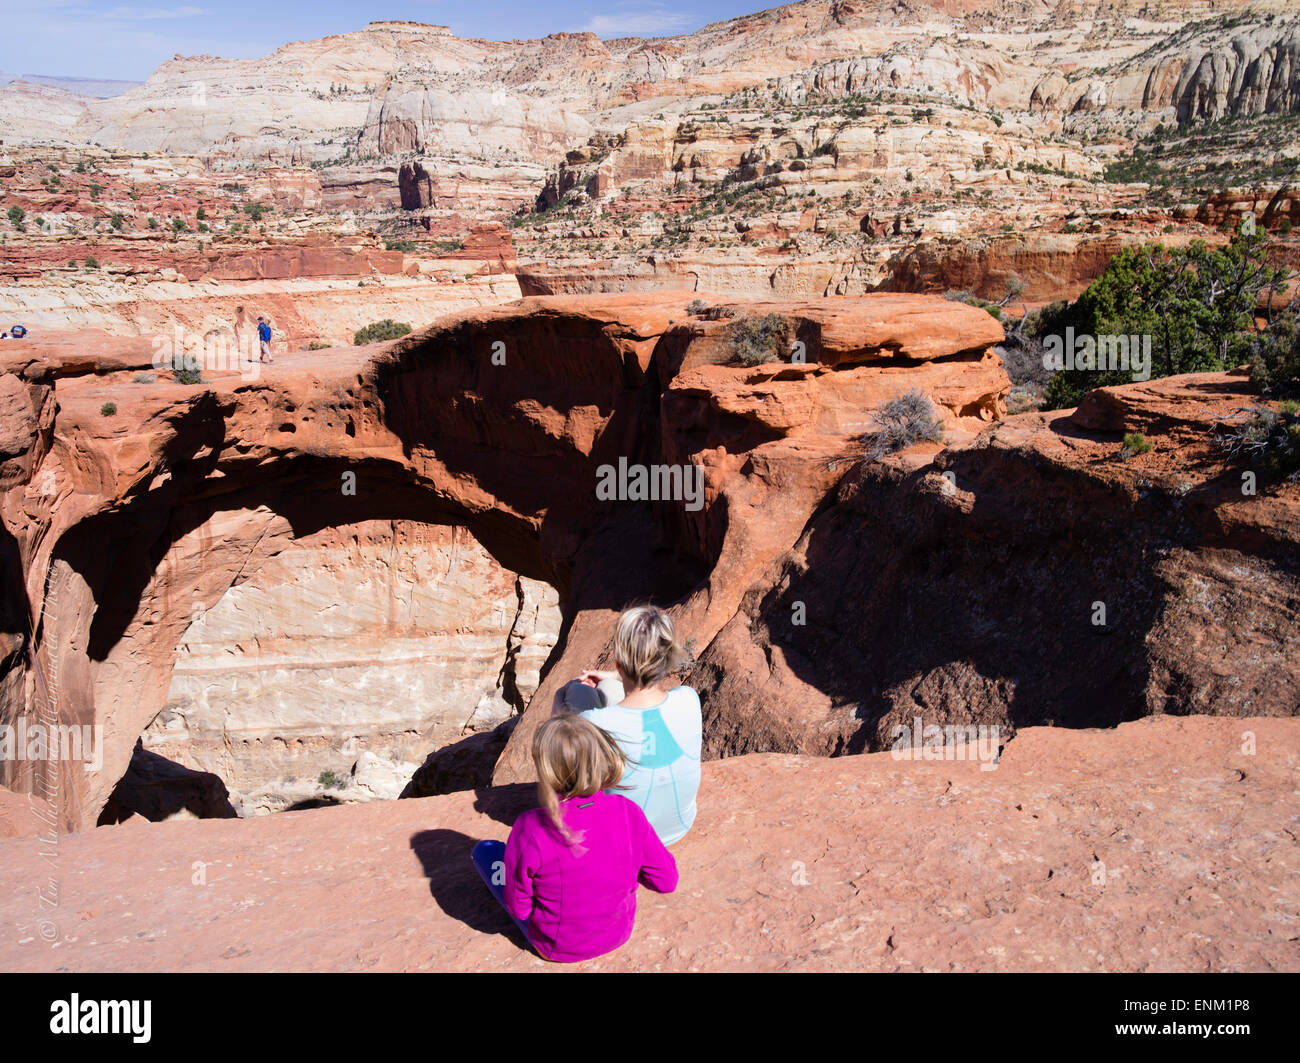 Spectators watch a climber. Scene from Cassidy Arch, Capitol Reef National Park, Utah. Stock Photo